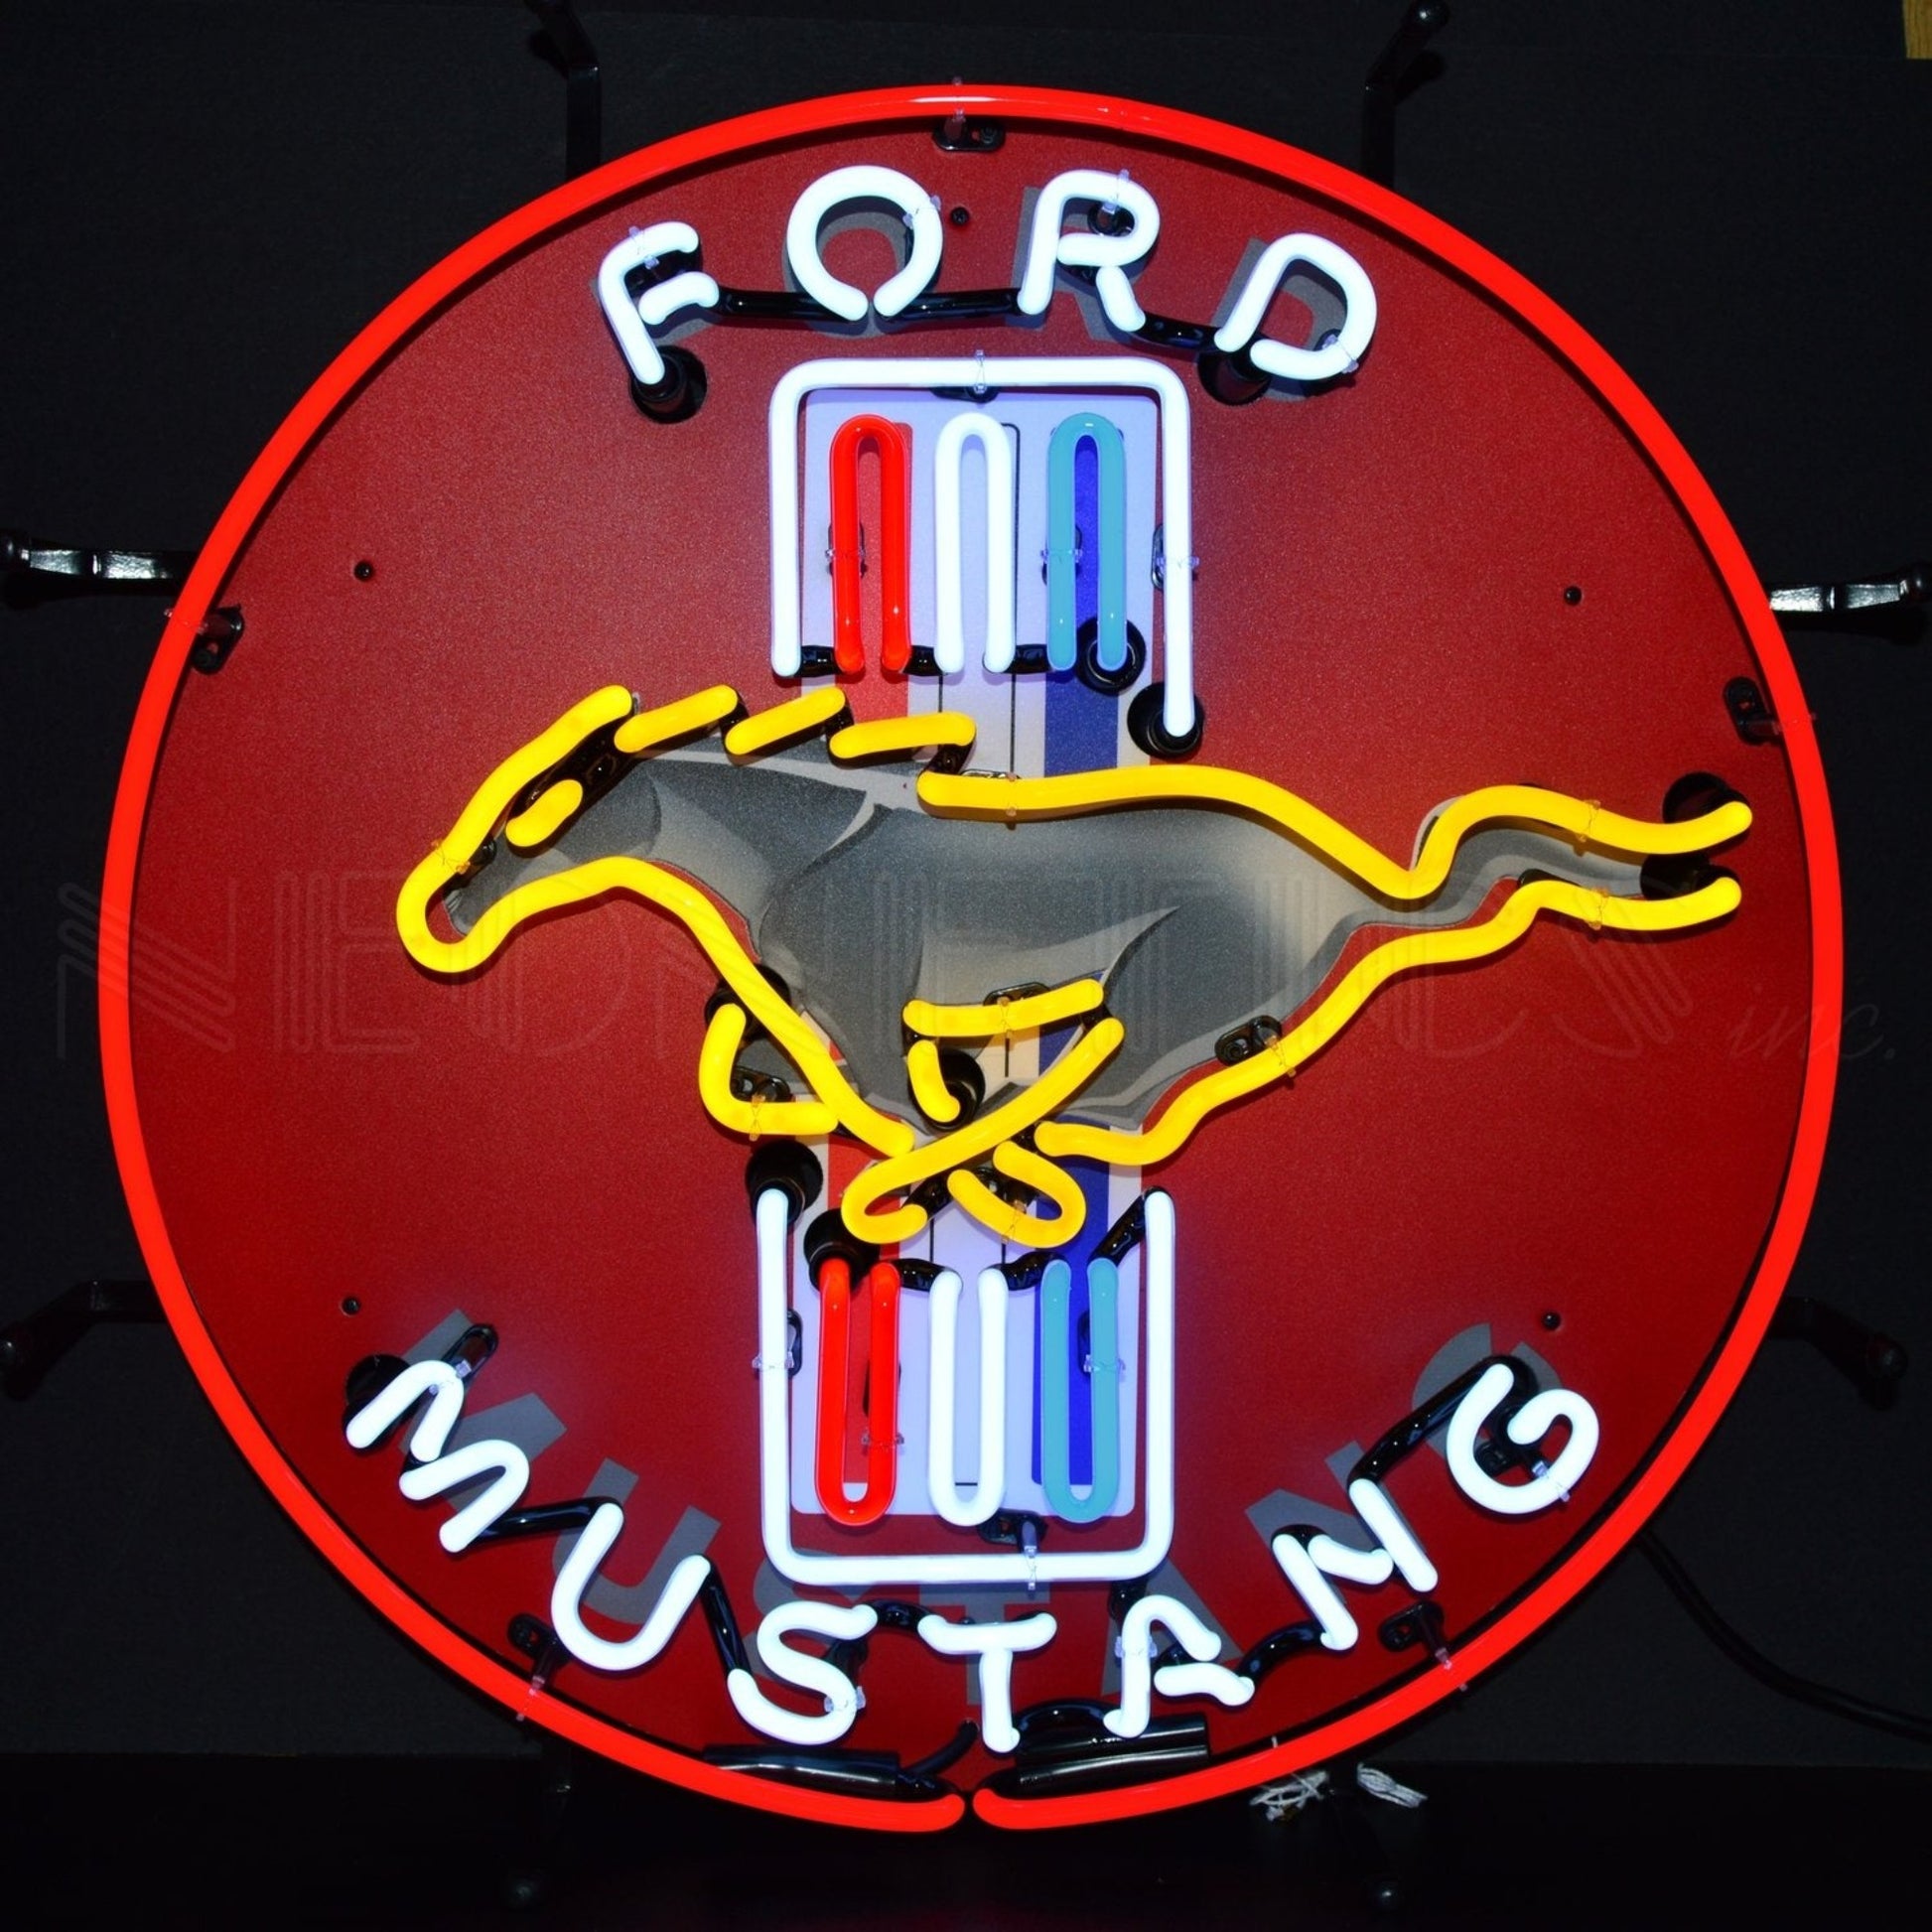 Vibrant Ford Mustang Neon Sign with the iconic galloping horse logo and multicolored lettering on a red background, perfect for any muscle car enthusiast's decor.